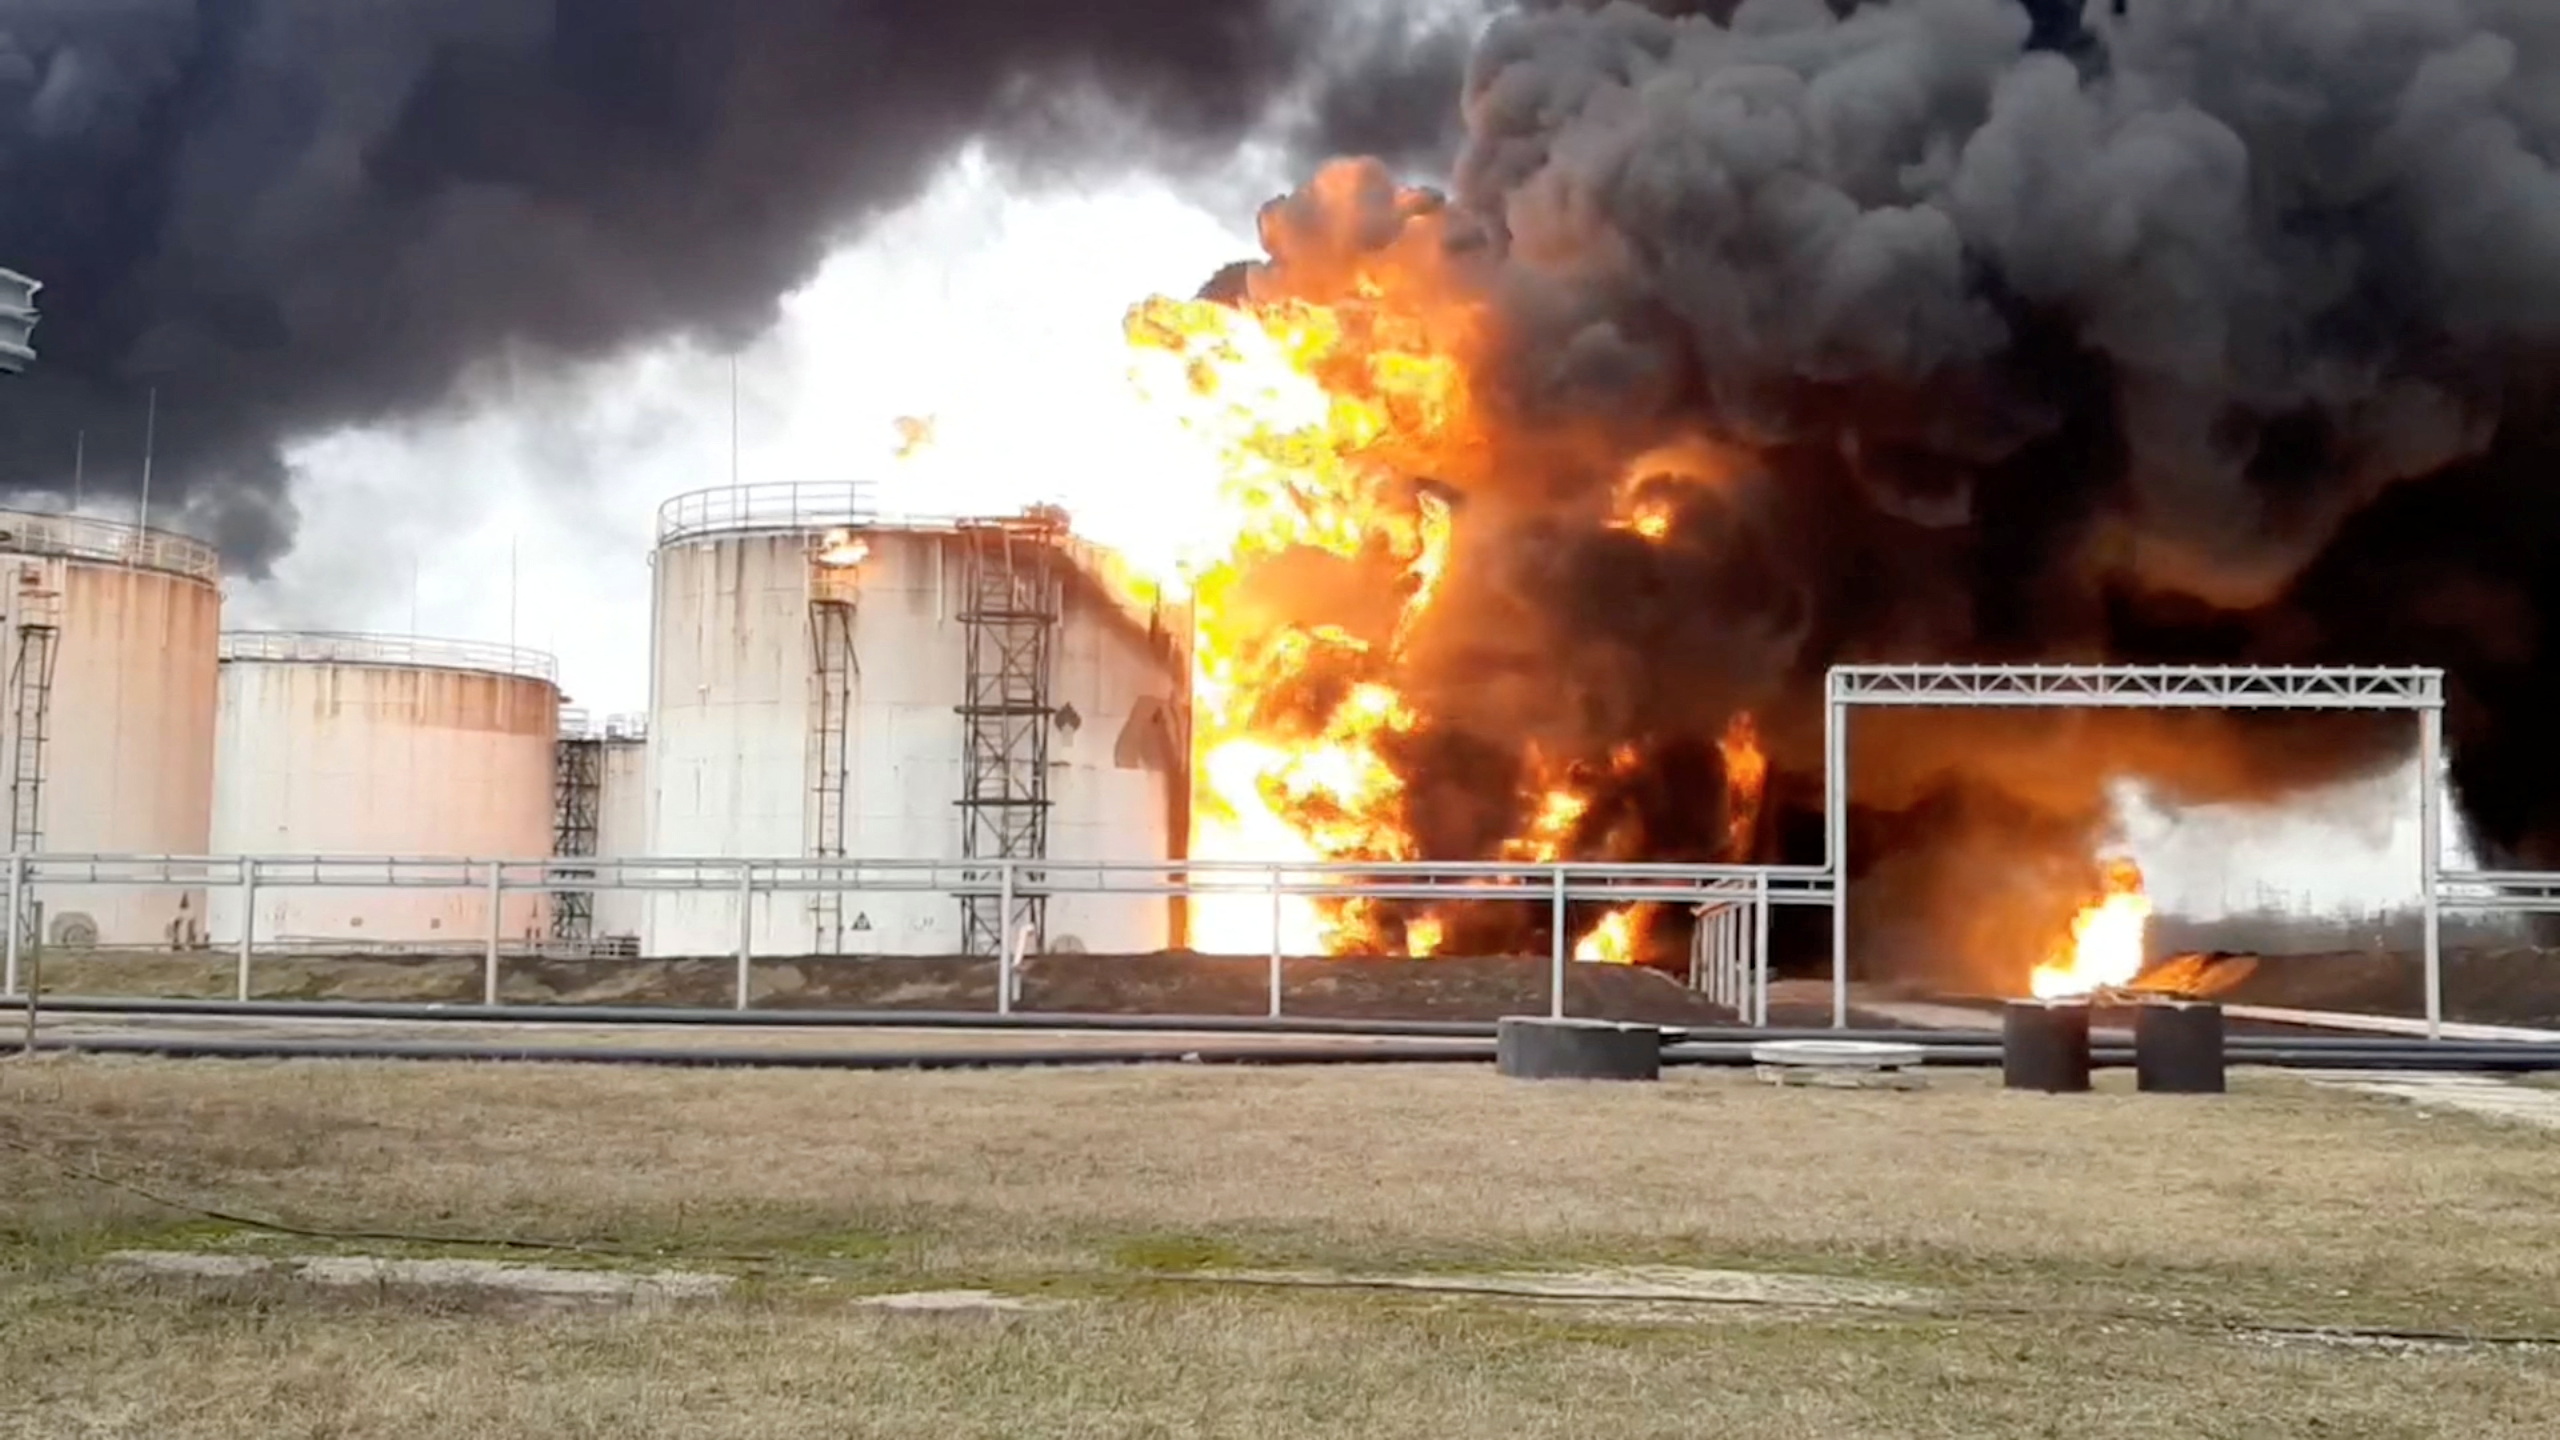 A still image taken from video footage shows a fuel depot on fire in the city of Belgorod, Russia, on April 1.